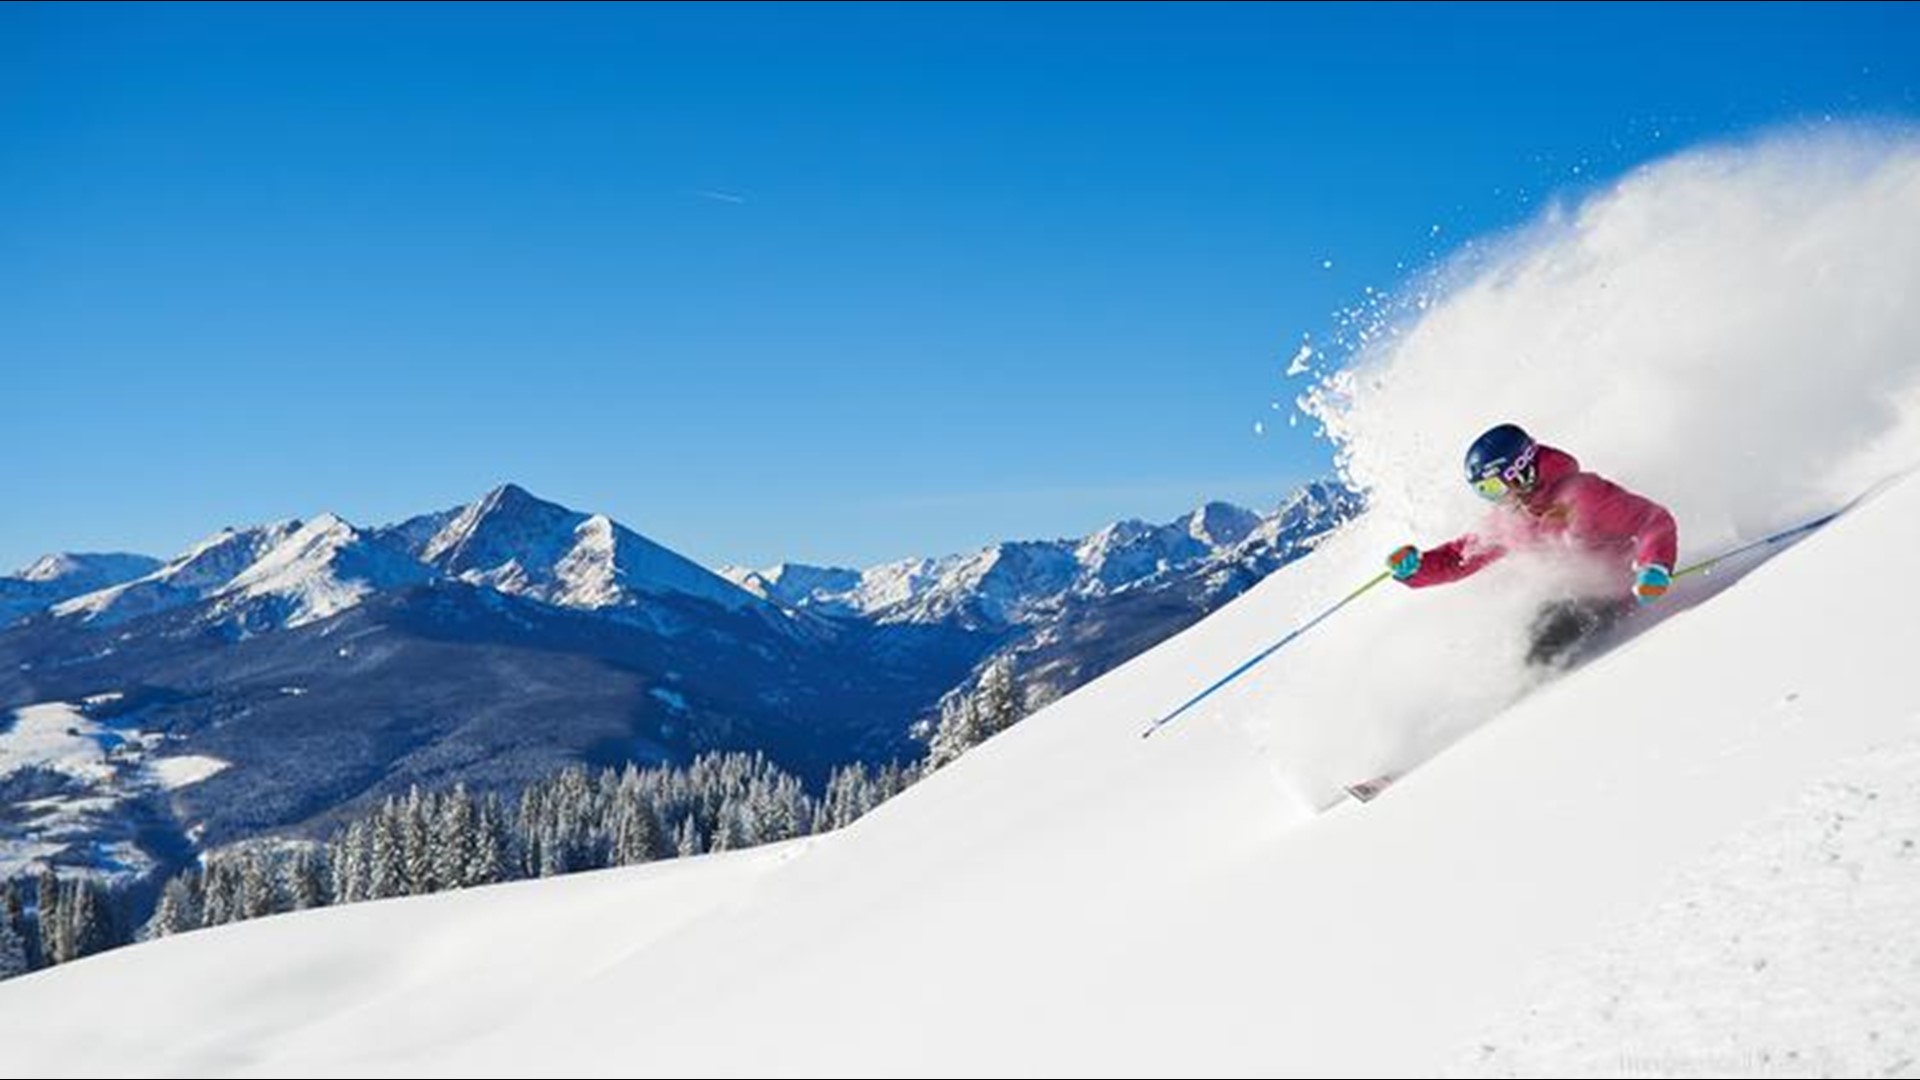 Vail Resorts' 2019-20 Epic Pass, Epic Local Pass and Military Epic Pass will include unlimited and unrestricted access to the ski areas.